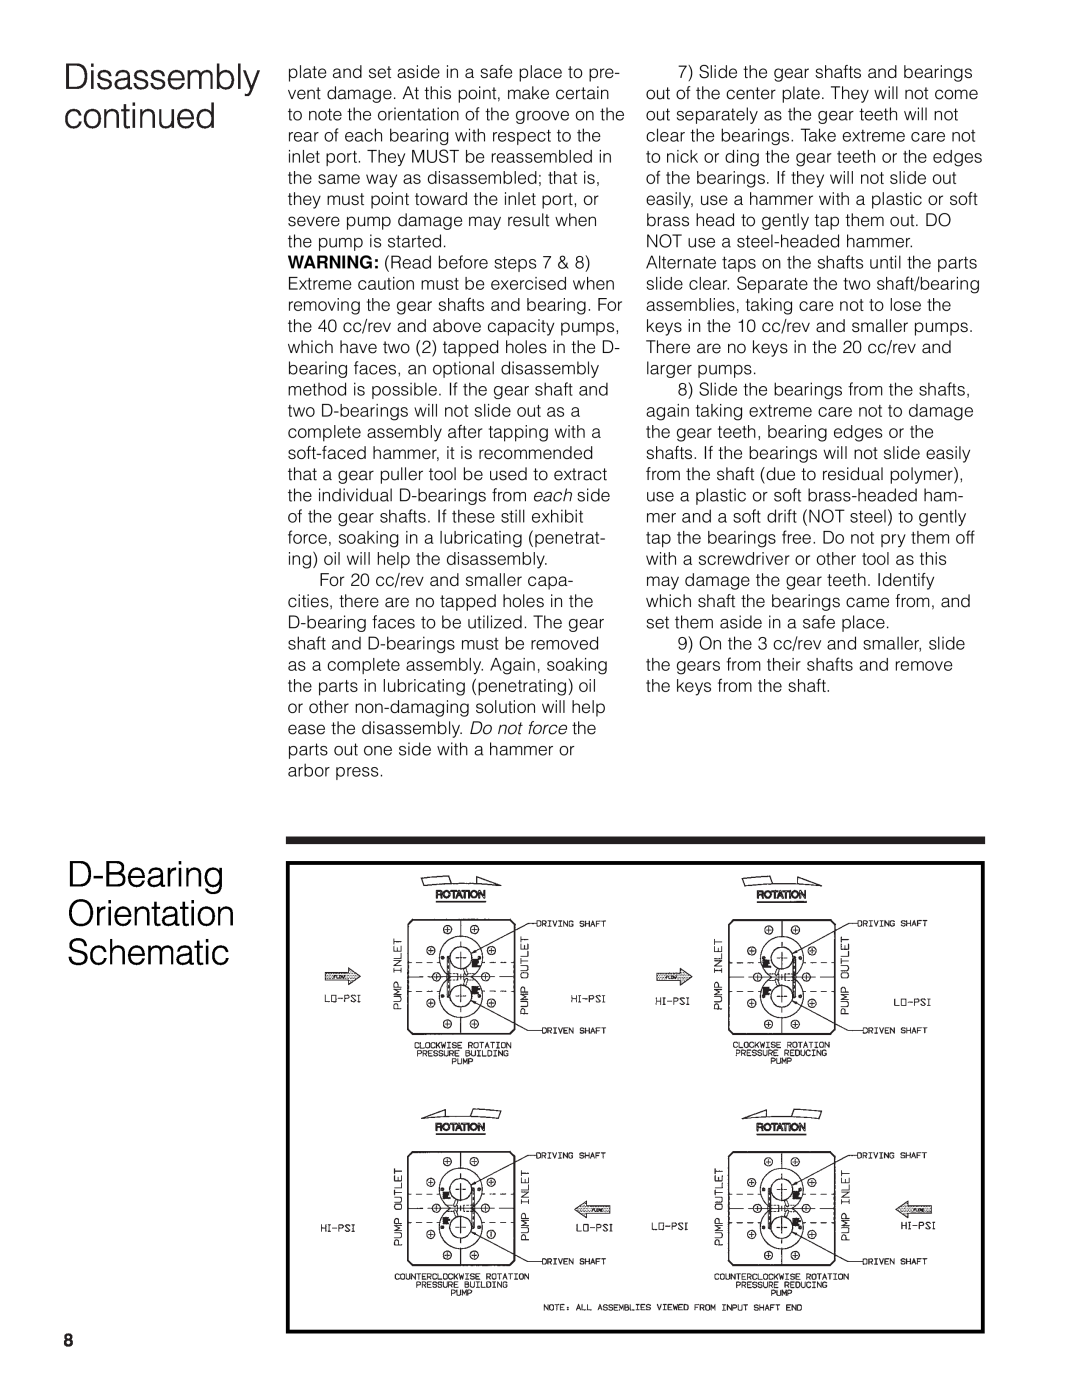 Zenith Pumps manual D-Bearing Orientation Schematic, Disassembly continued 